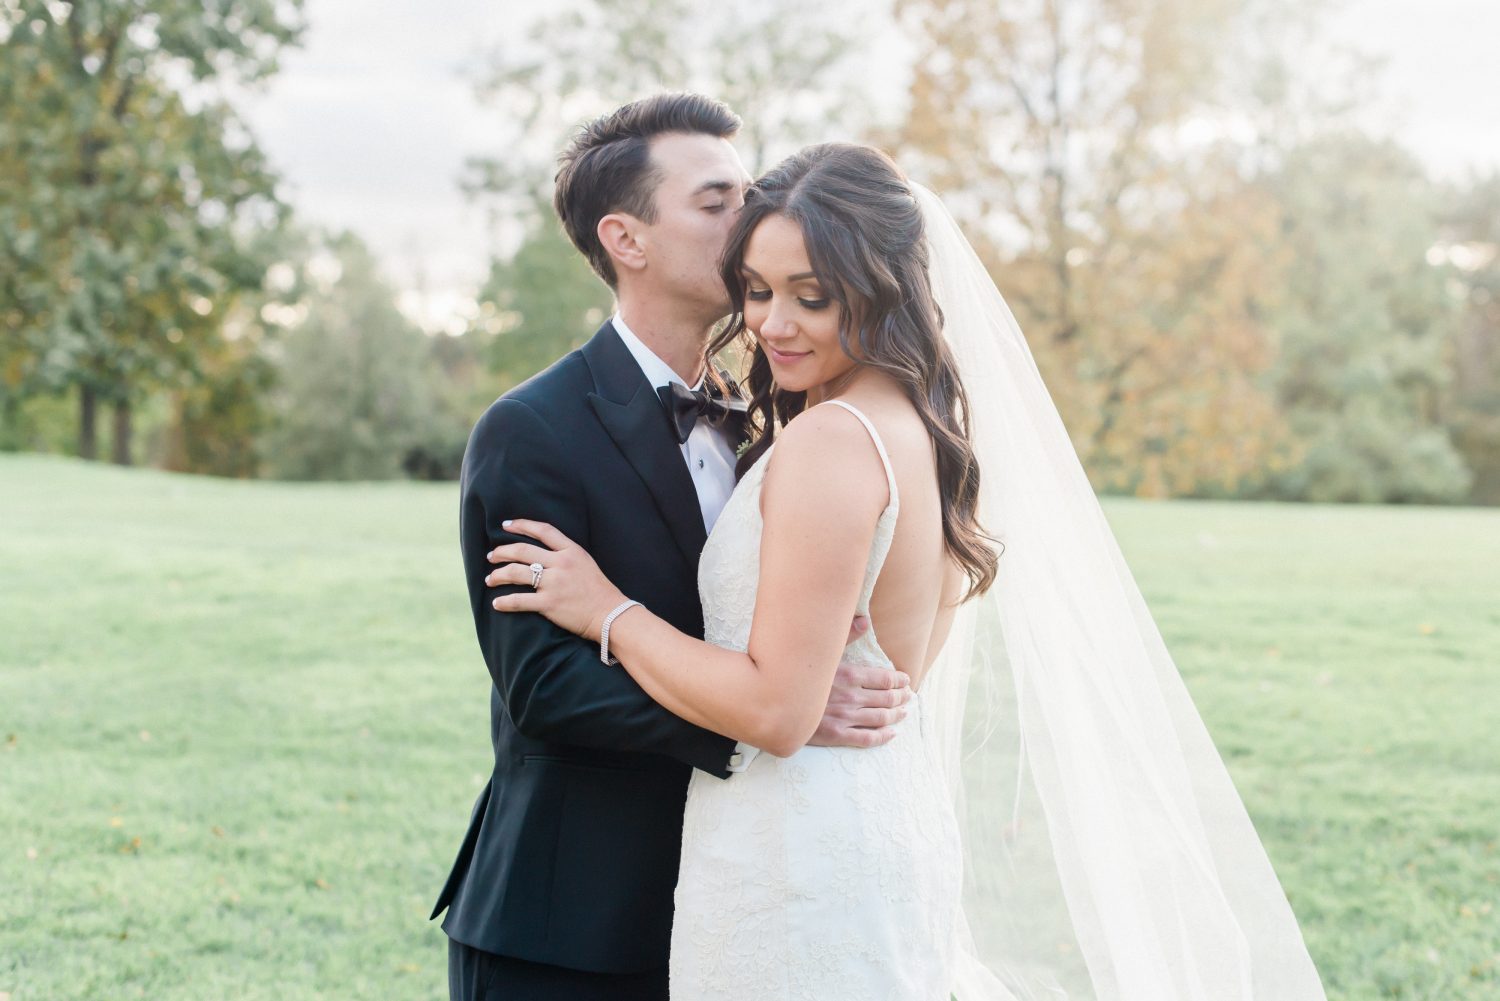 Chicago Light and Airy Wedding Photographer - Country Club Wedding